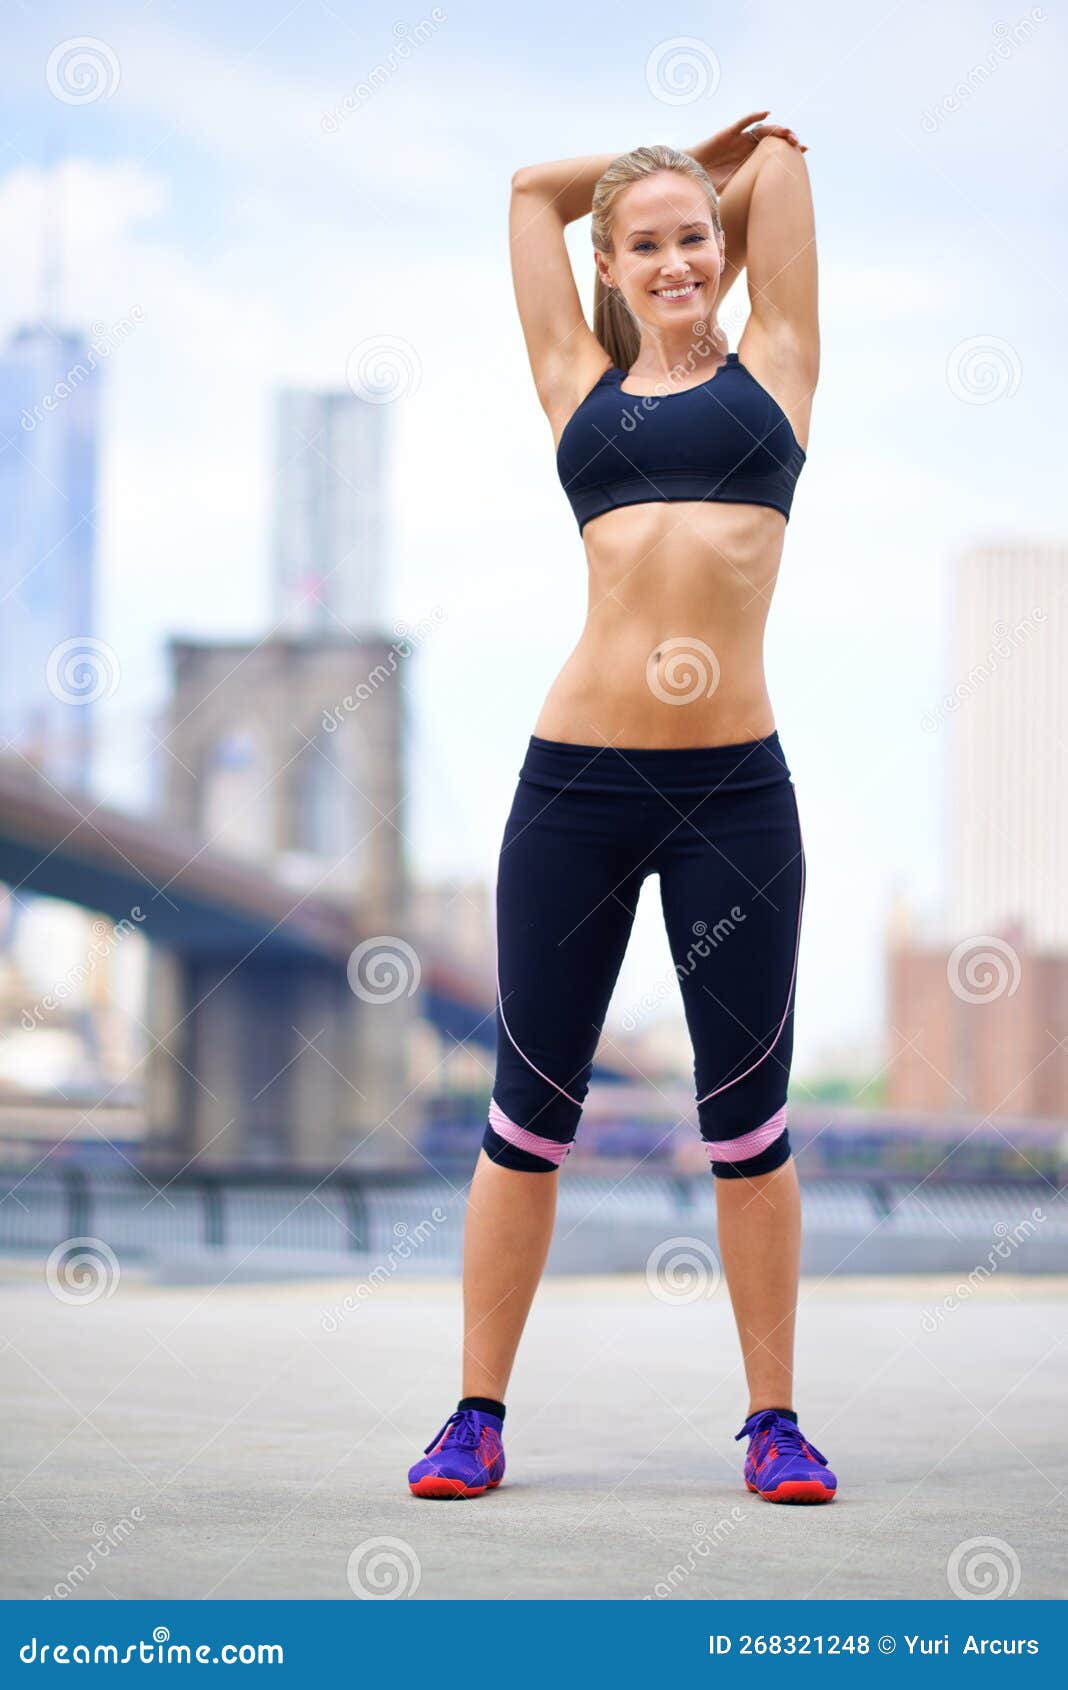 Fitness Enthusiast. Portrait of a Beautiful Woman Stretching before Her Run  in the City. Stock Photo - Image of smiling, city: 268321248